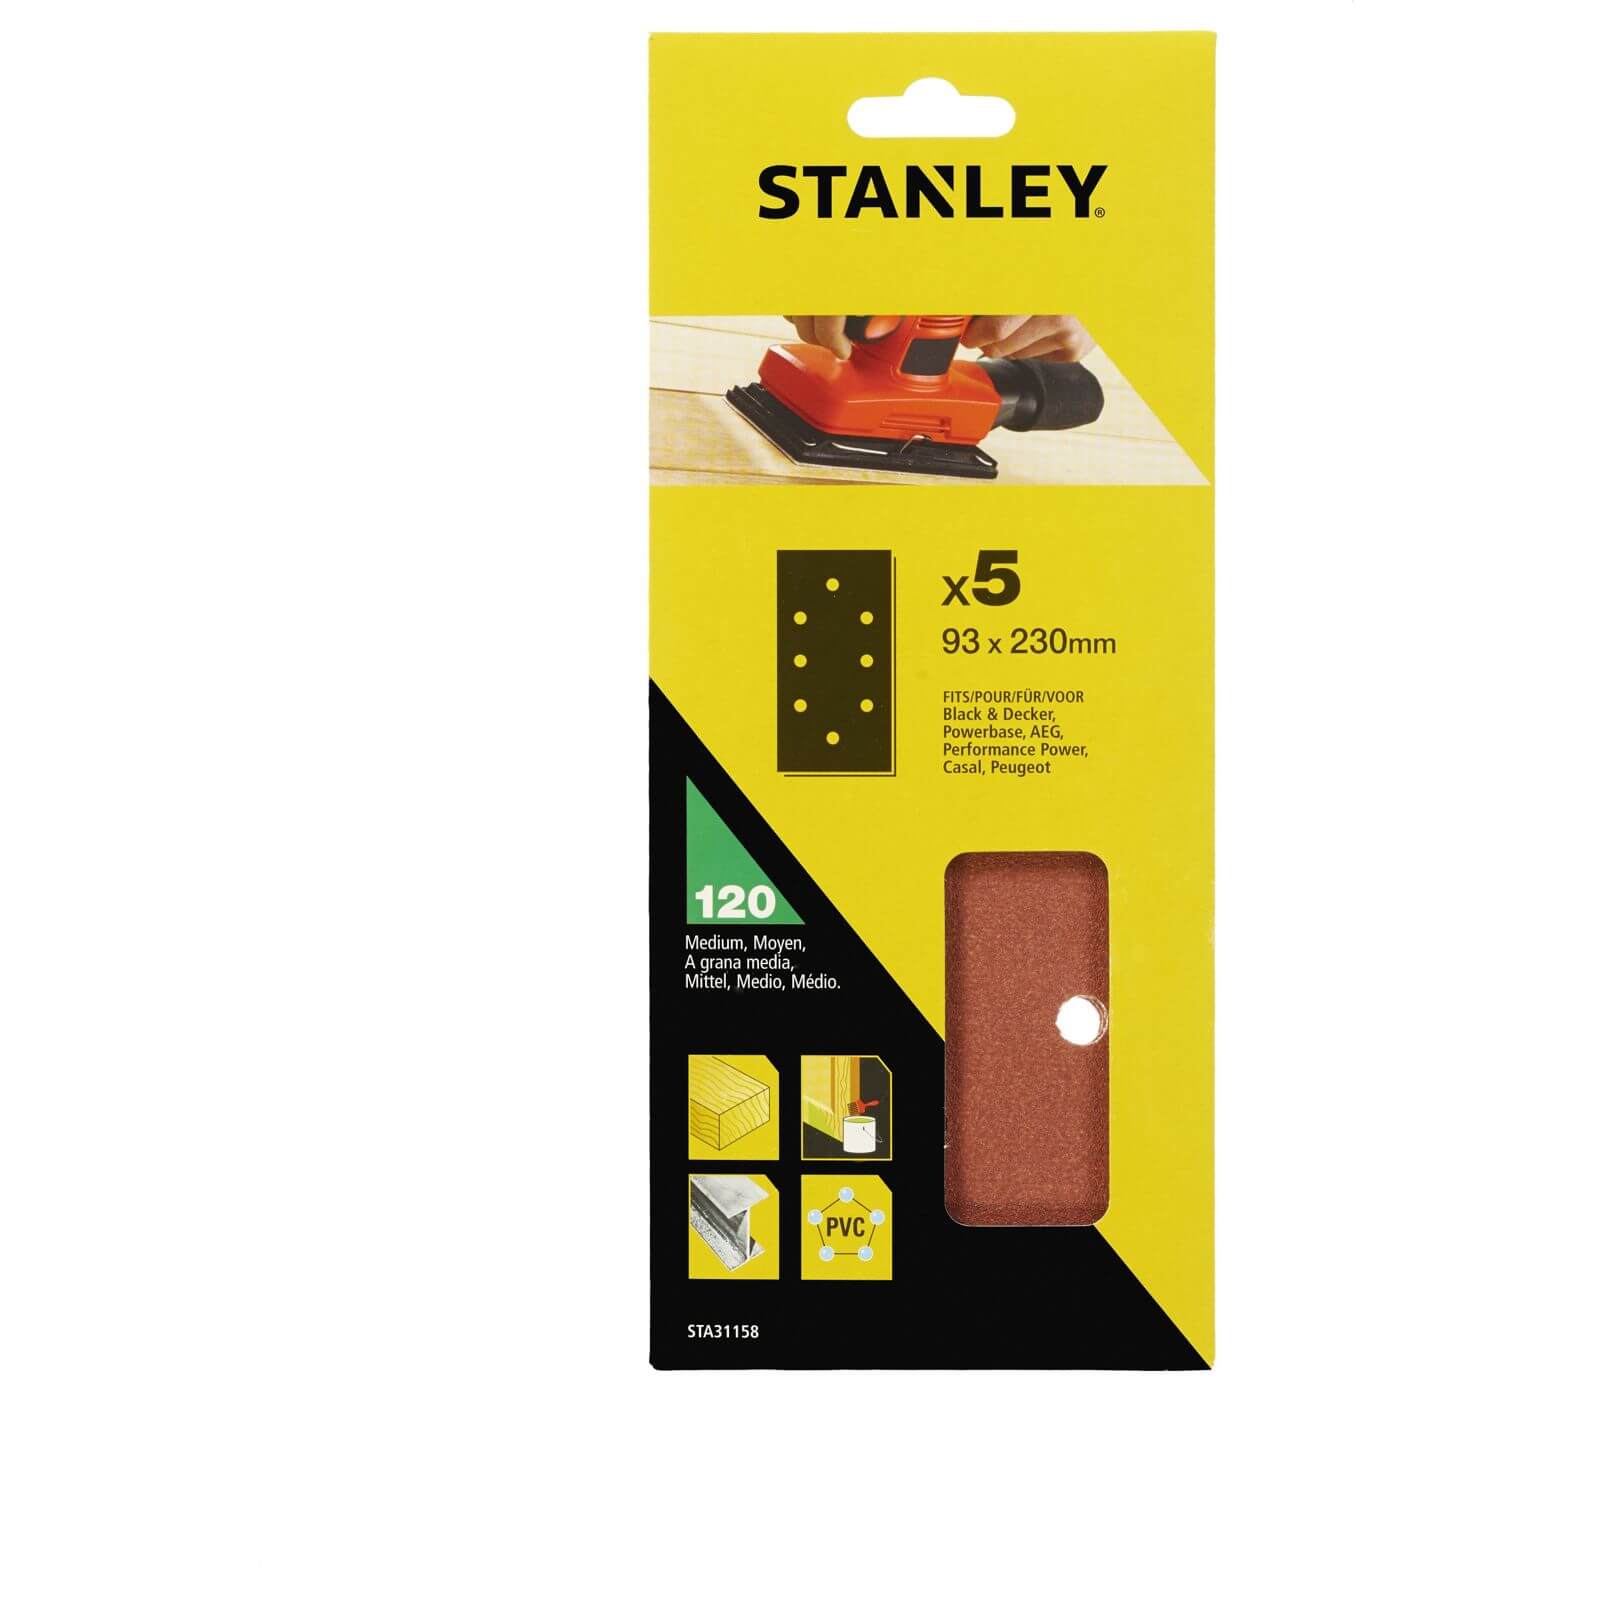 Photo of Stanley 1/3 Sheet Sander Punched Wire Clip 120g Sanding Sheets - Sta31158-xj